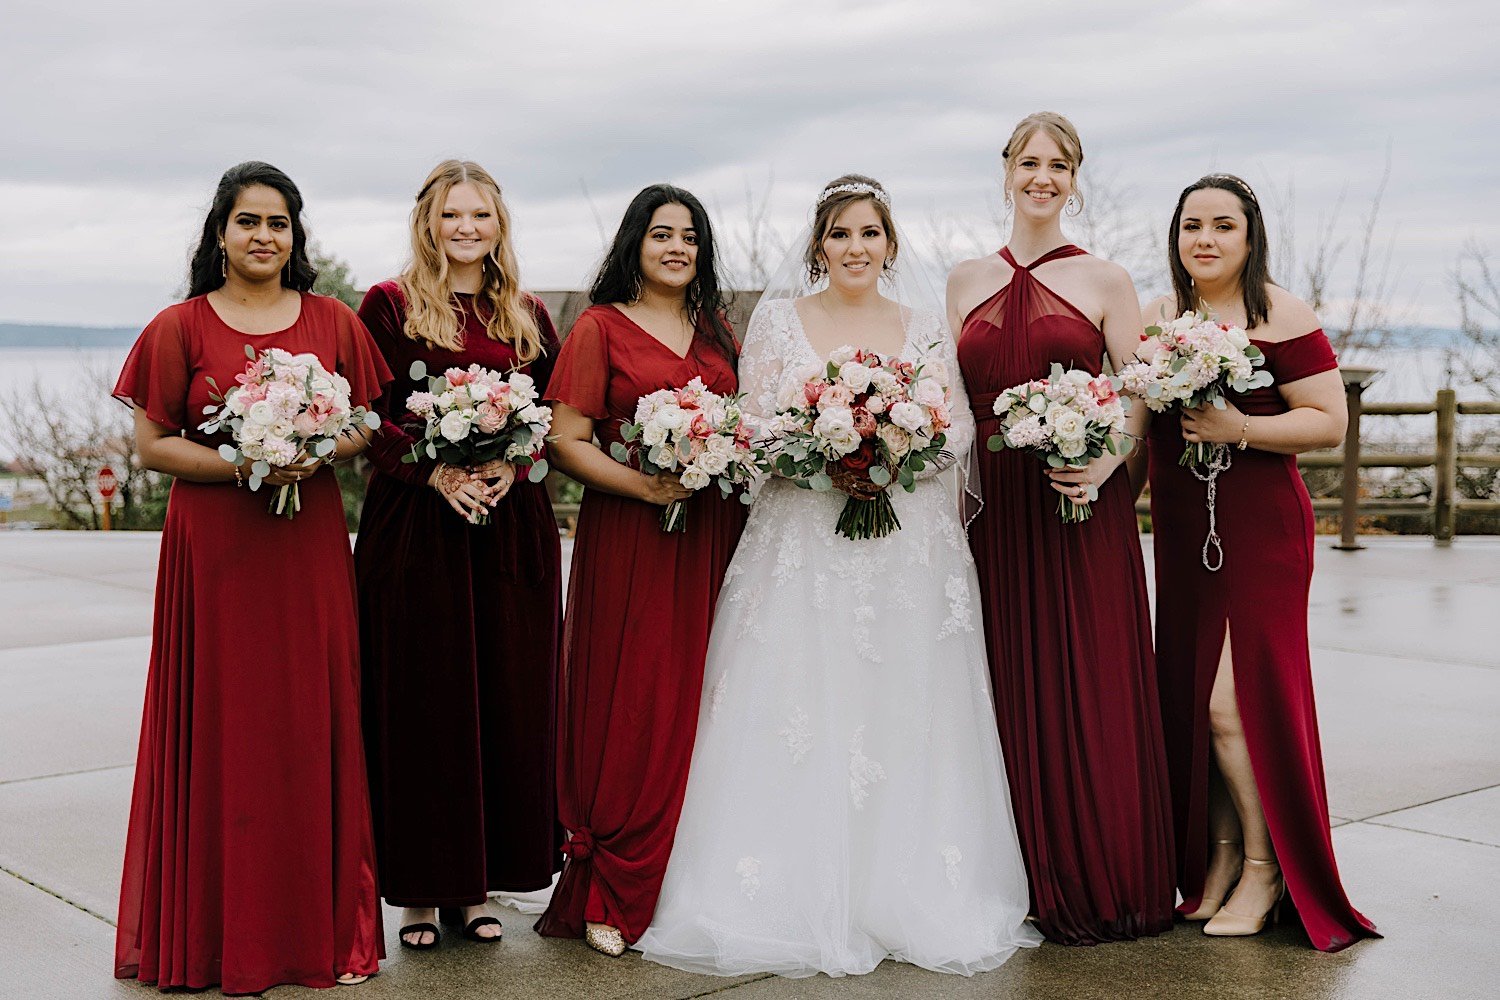 Bride and bridesmaids pose together and smile at the camera outside the Rosehill Community Center